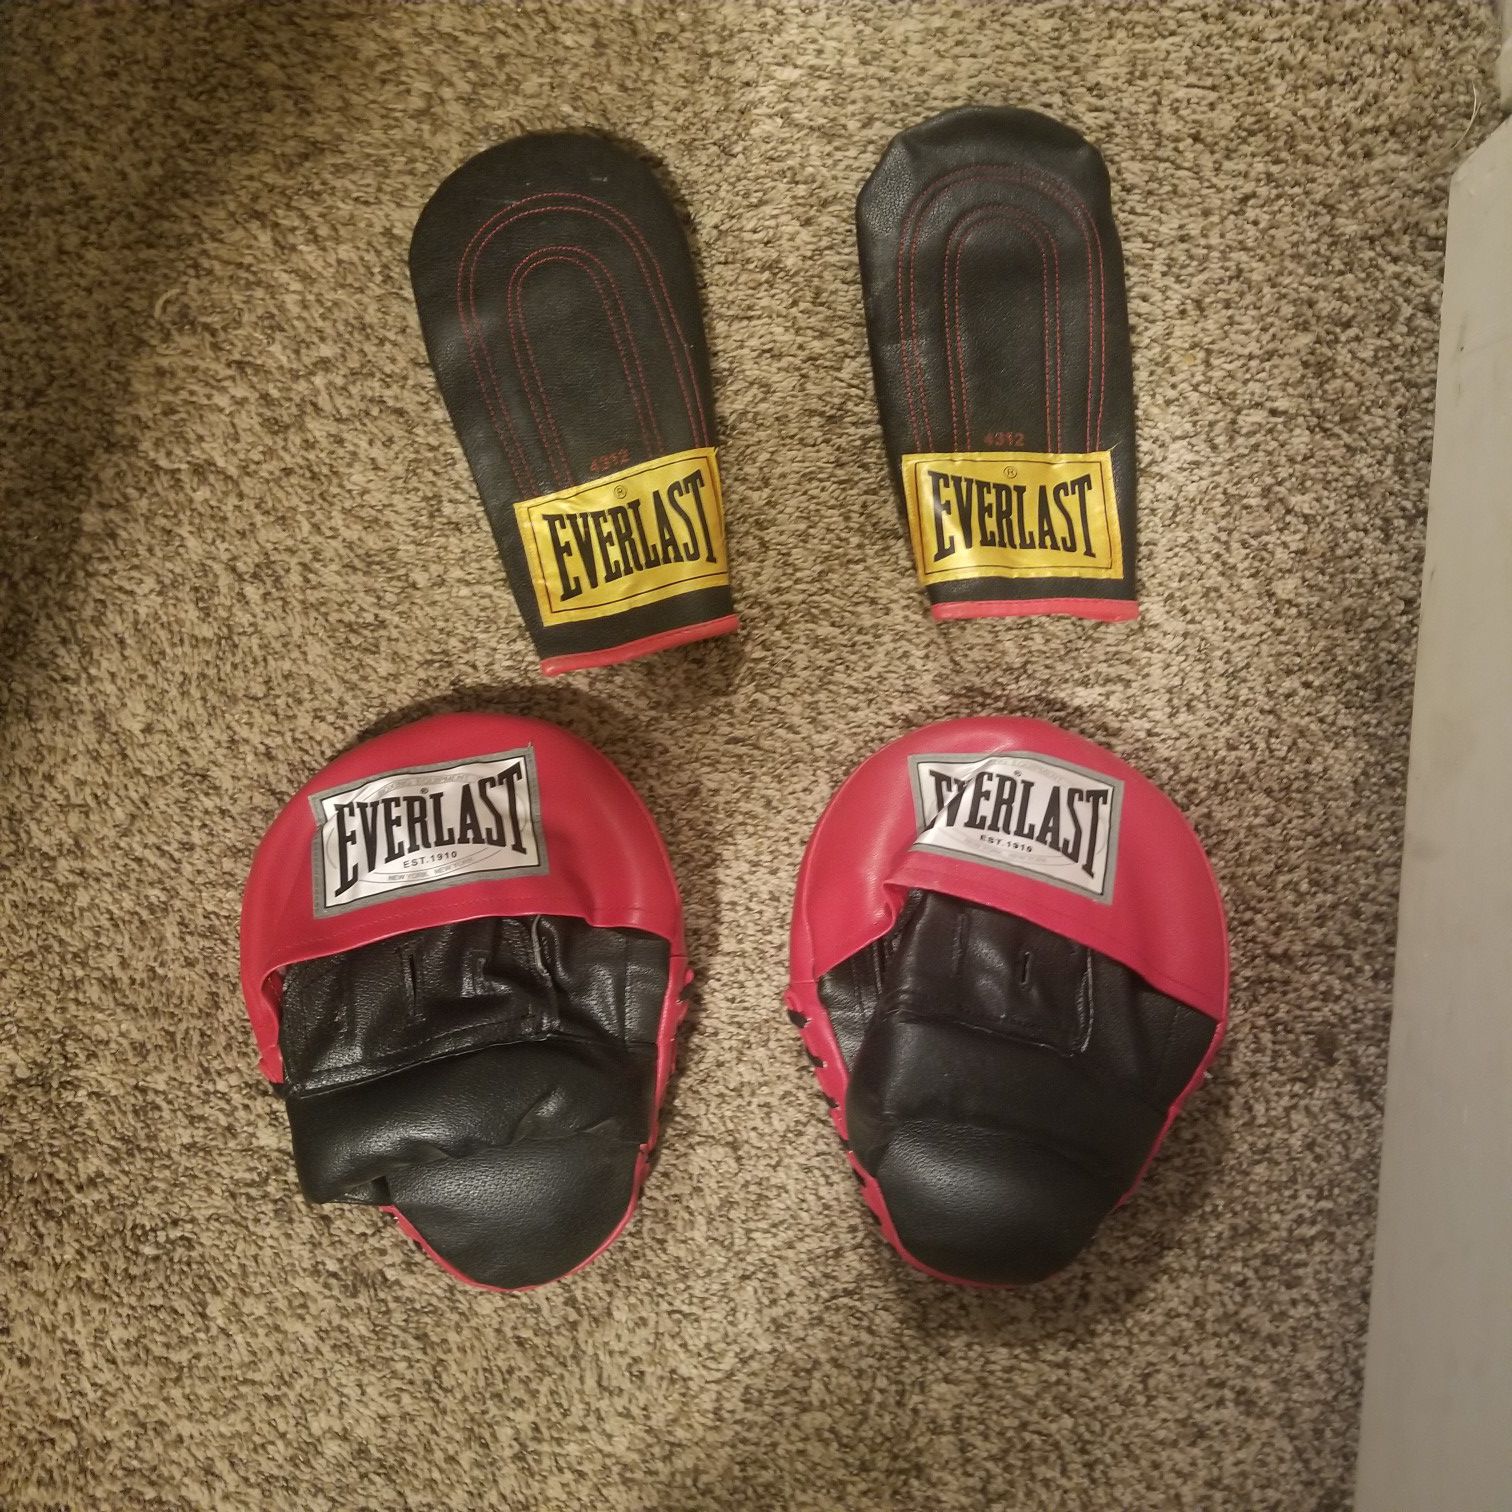 Mantis Punch Mitts